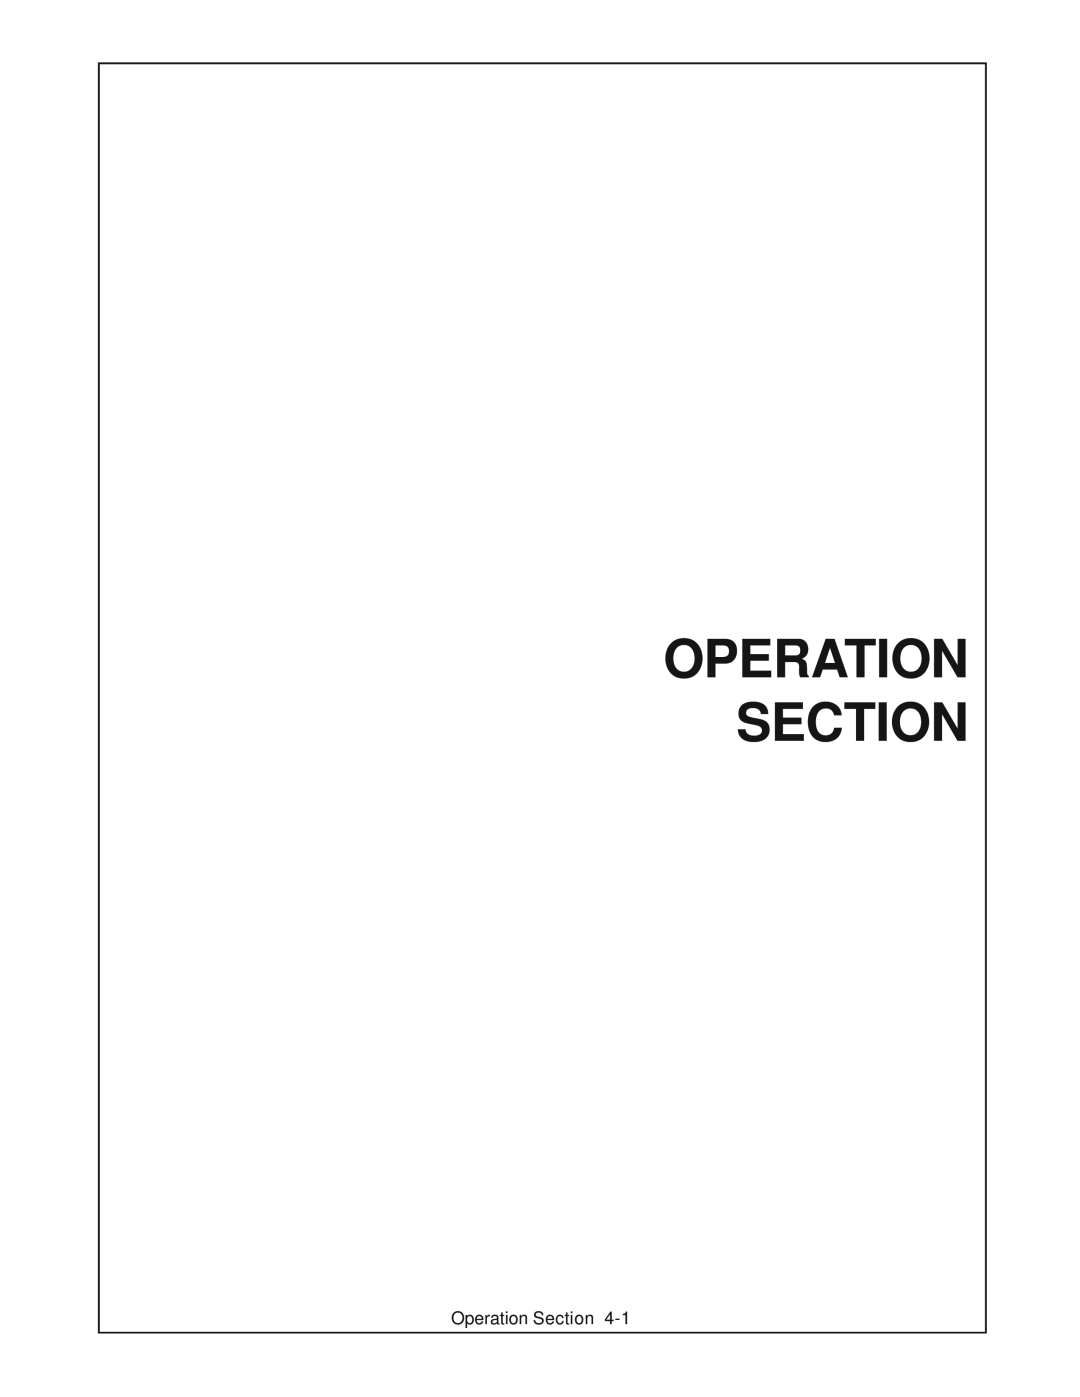 Grizzly 52 manual Operation Section 